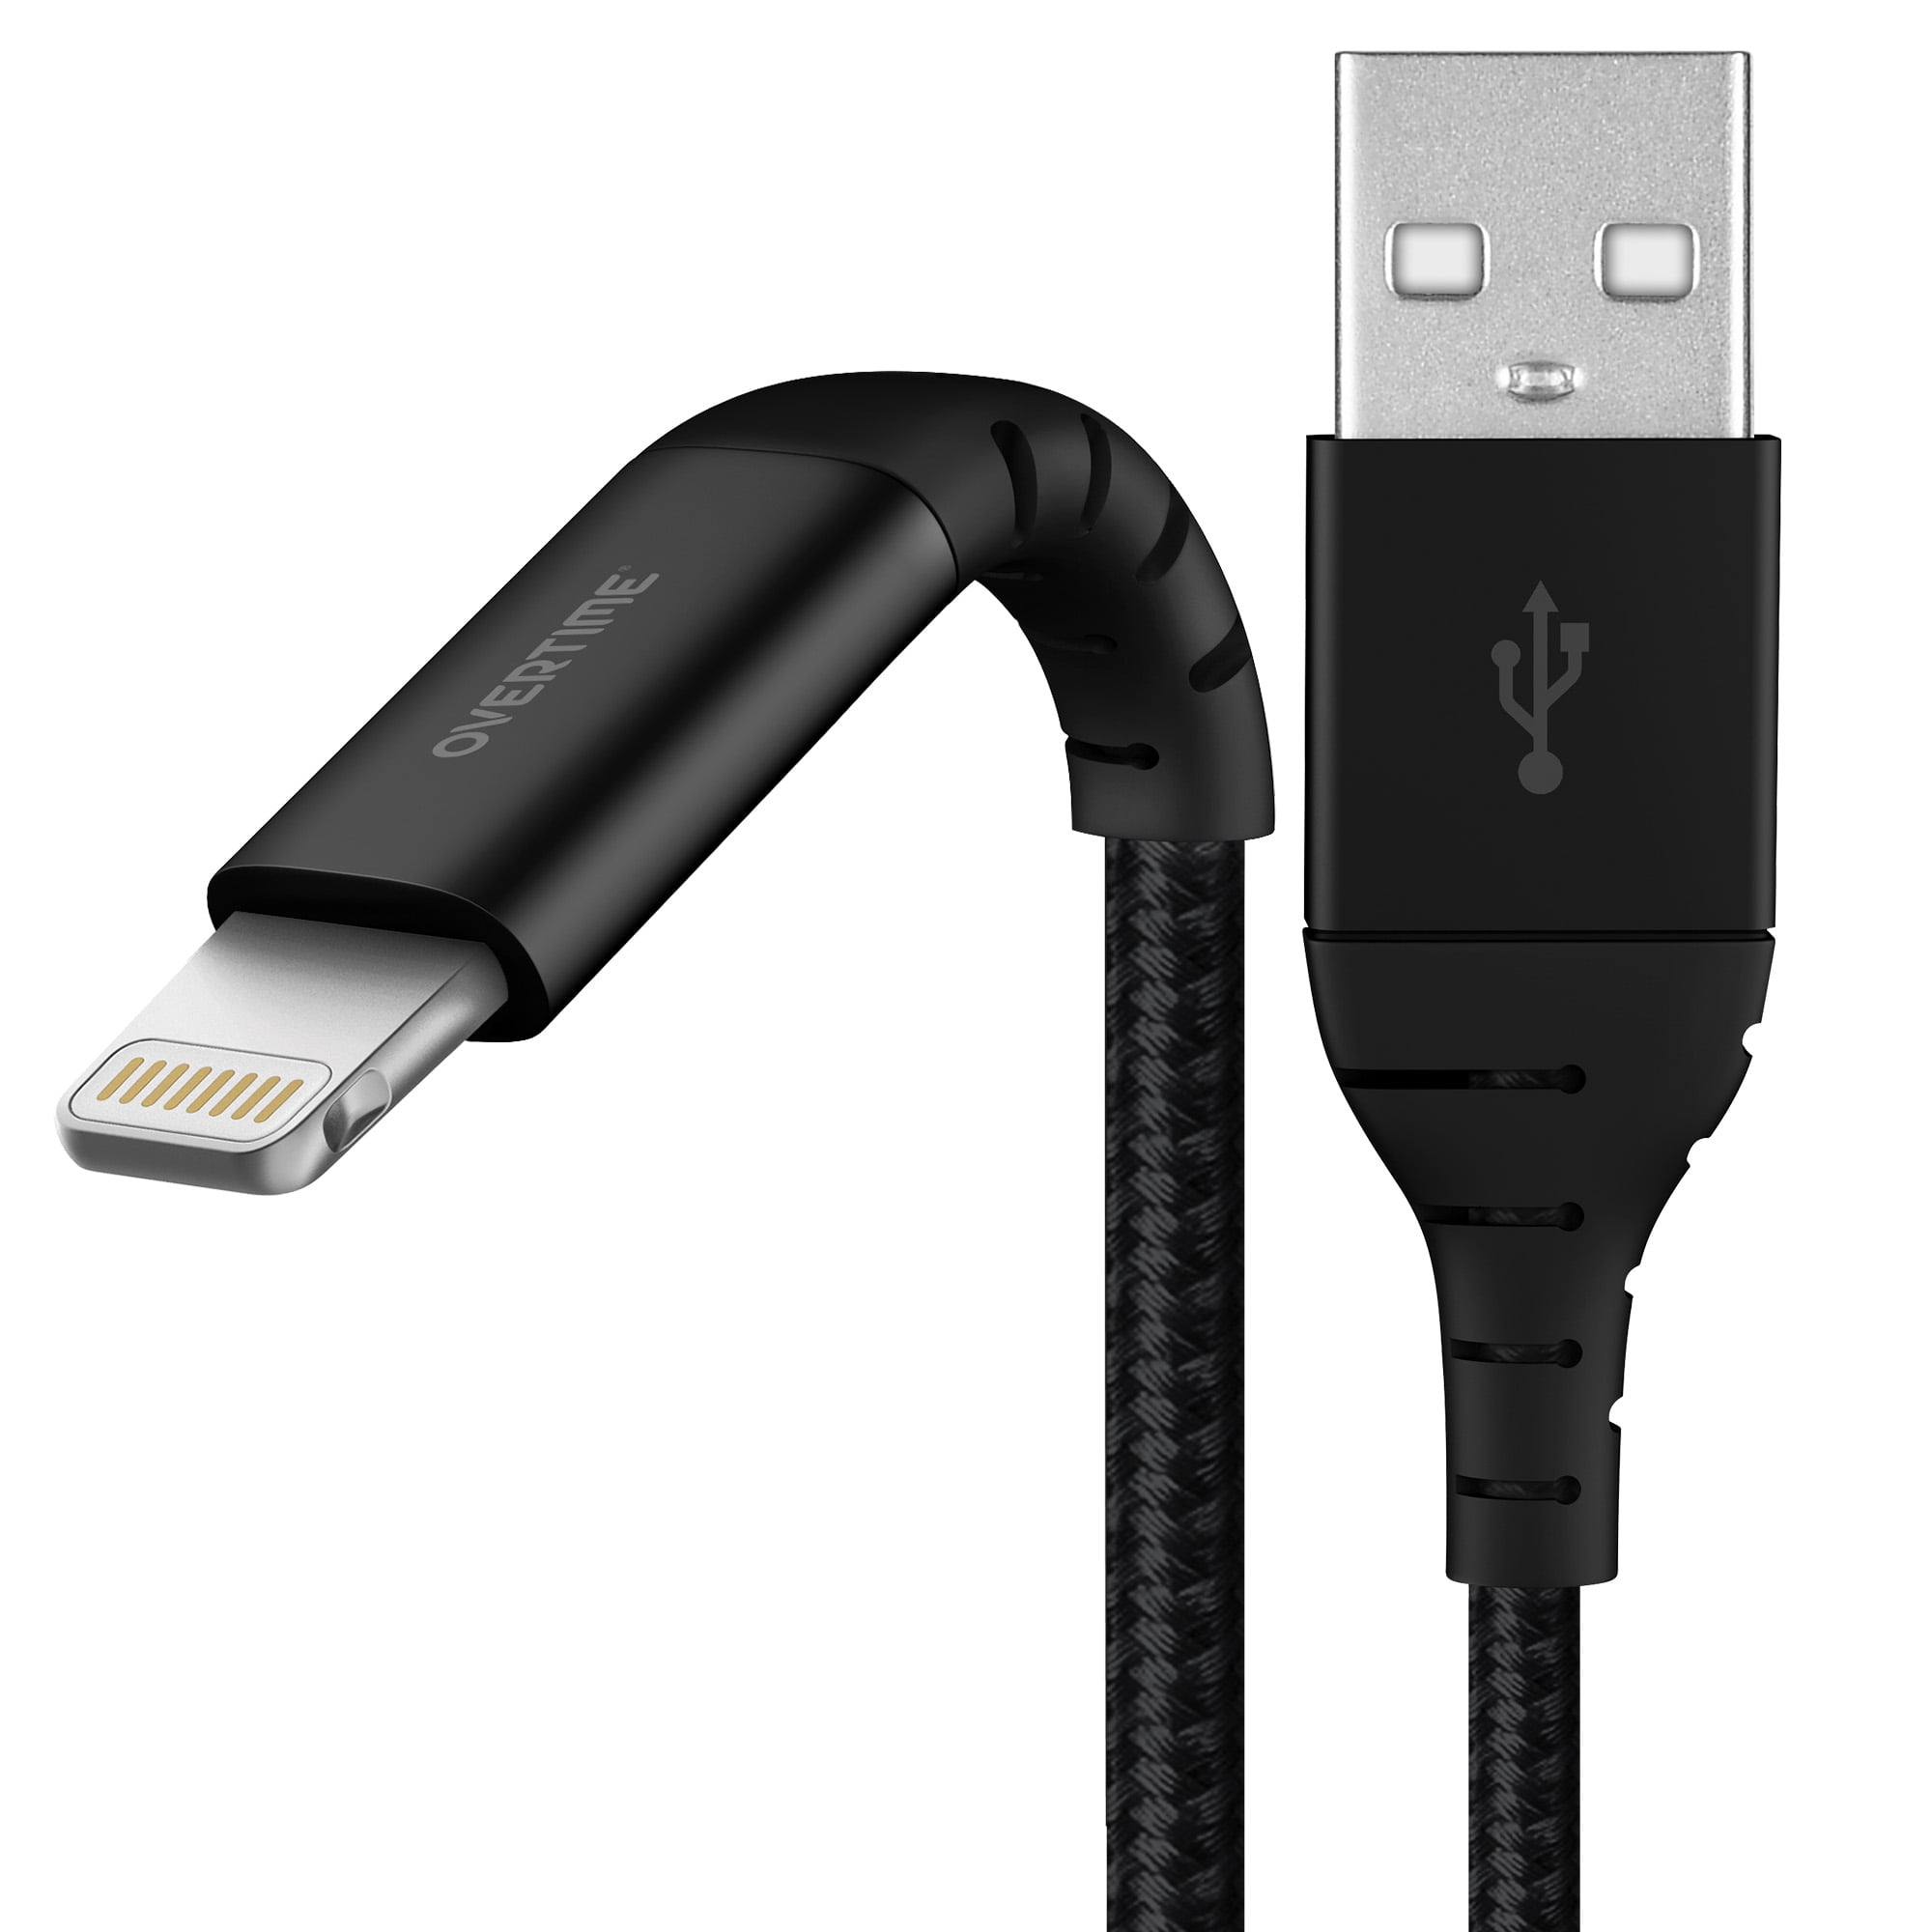 Precipice Expect scene Overtime 6 Foot iPhone Charger Apple MFI Certified | Lightning iPhone  Charger Cable 6Ft, Nylon Braided Phone Charger and Sync Cable - Black -  Walmart.com